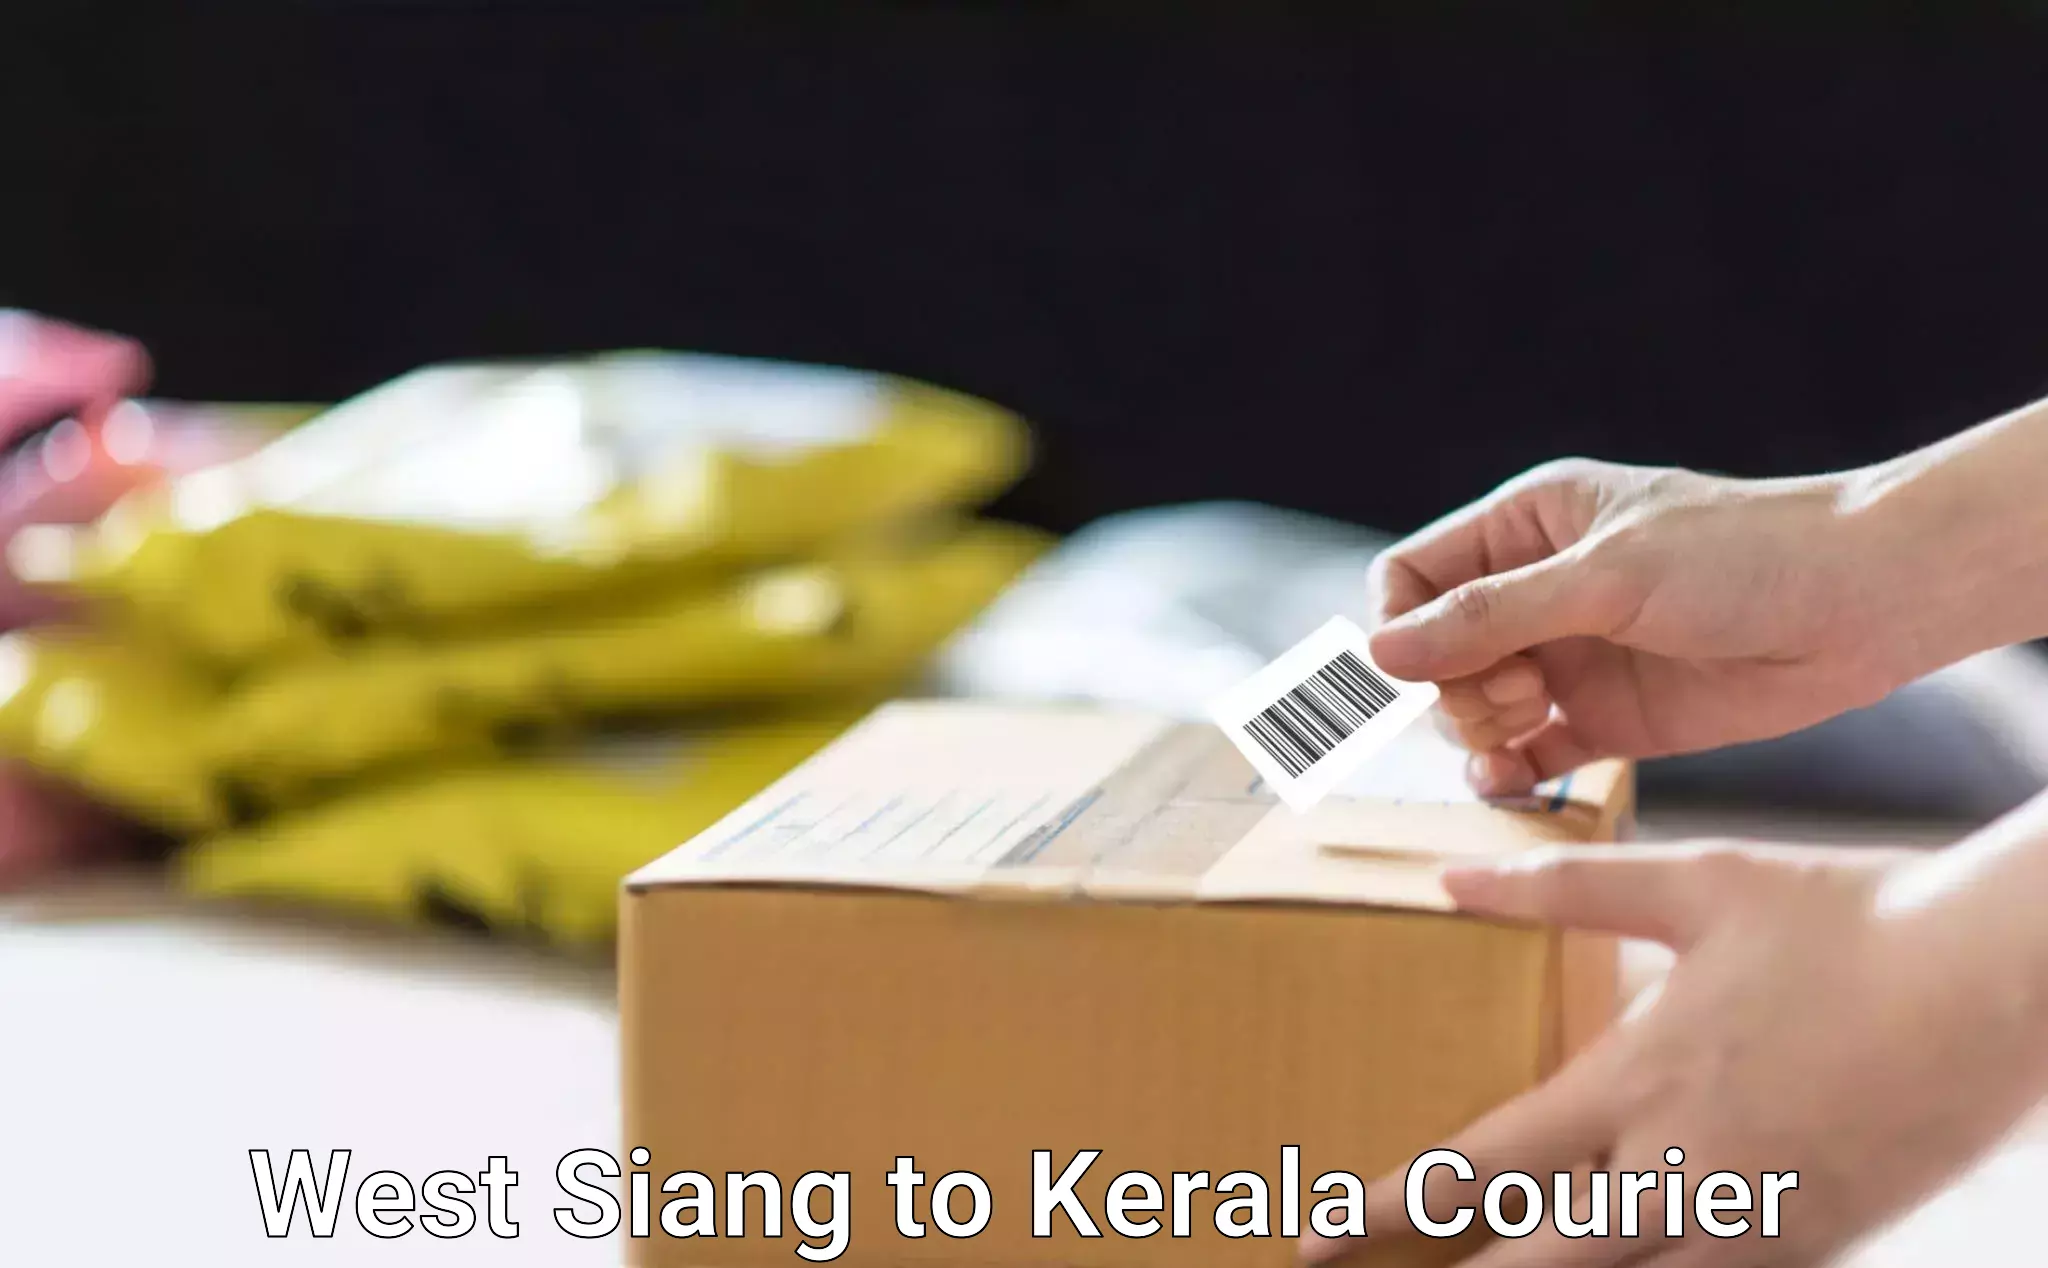 Digital courier platforms West Siang to Kerala